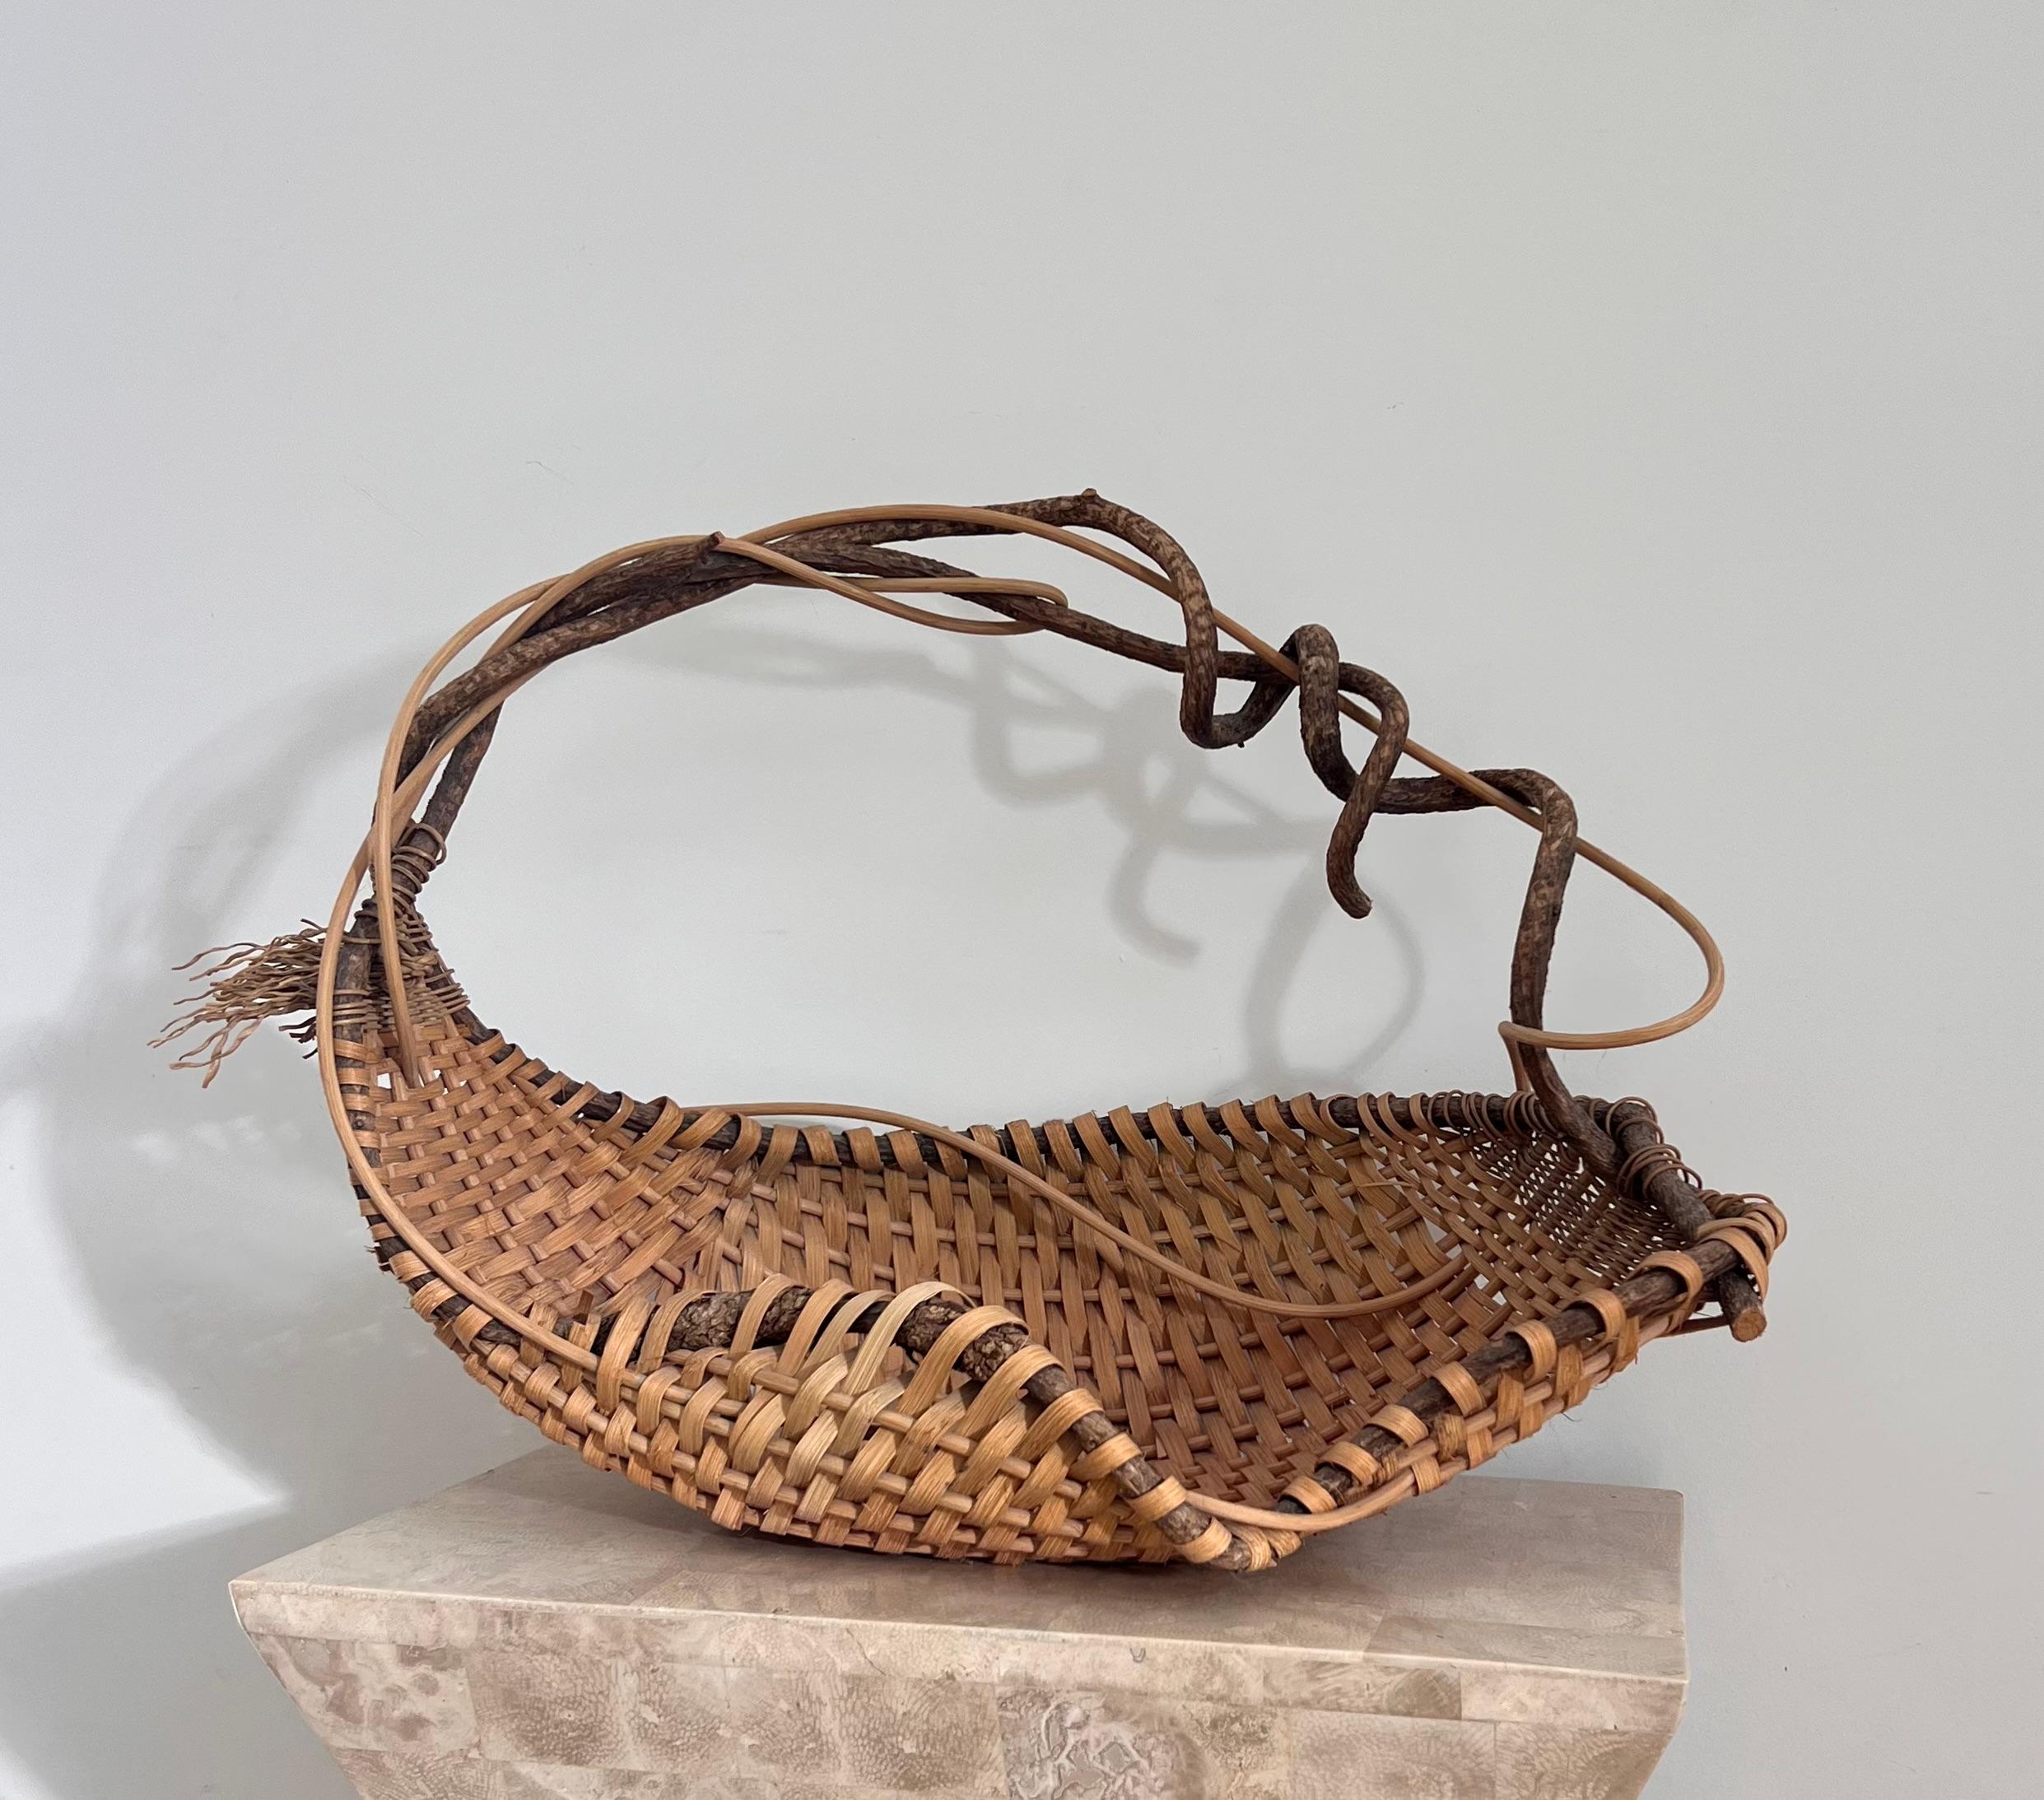 Vintage Handwoven Wicker and Wood Decorative Basket by Artist, Late 20th Century 1